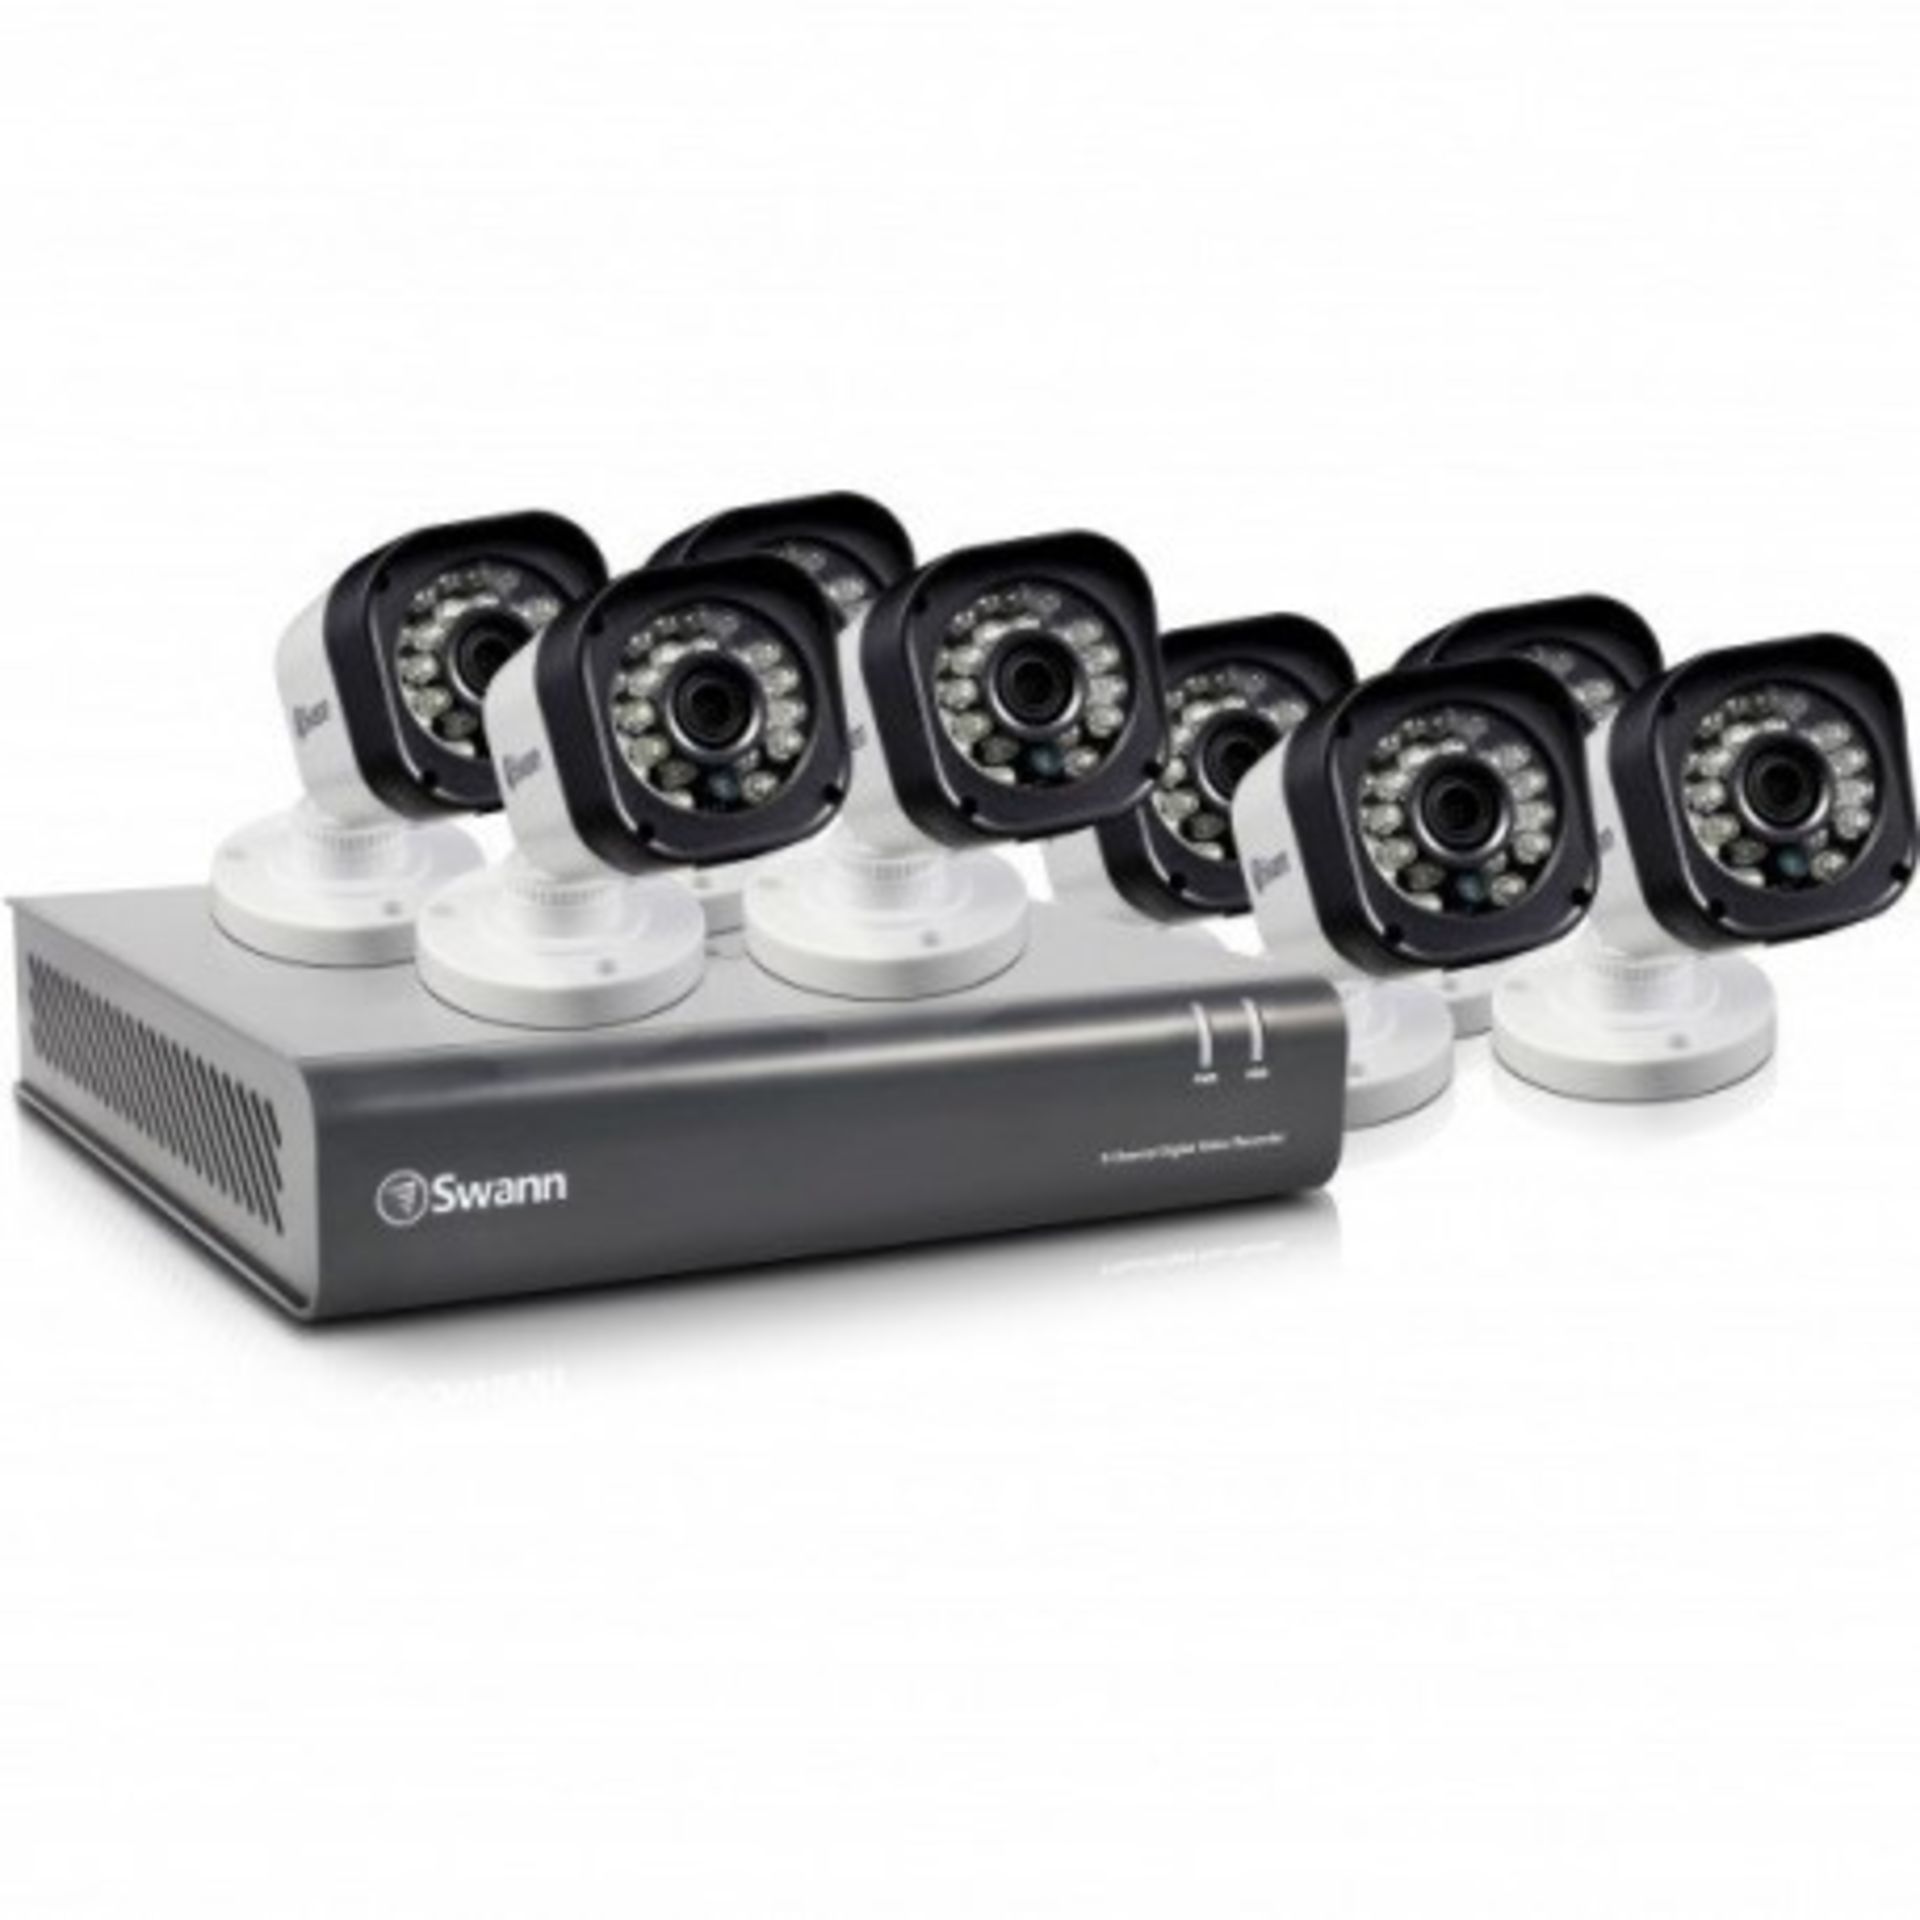 1 X SWAN 8-CHANNEL HD DIGITAL VIDEO RECORDER SECURITY SYSTEM RRP £400